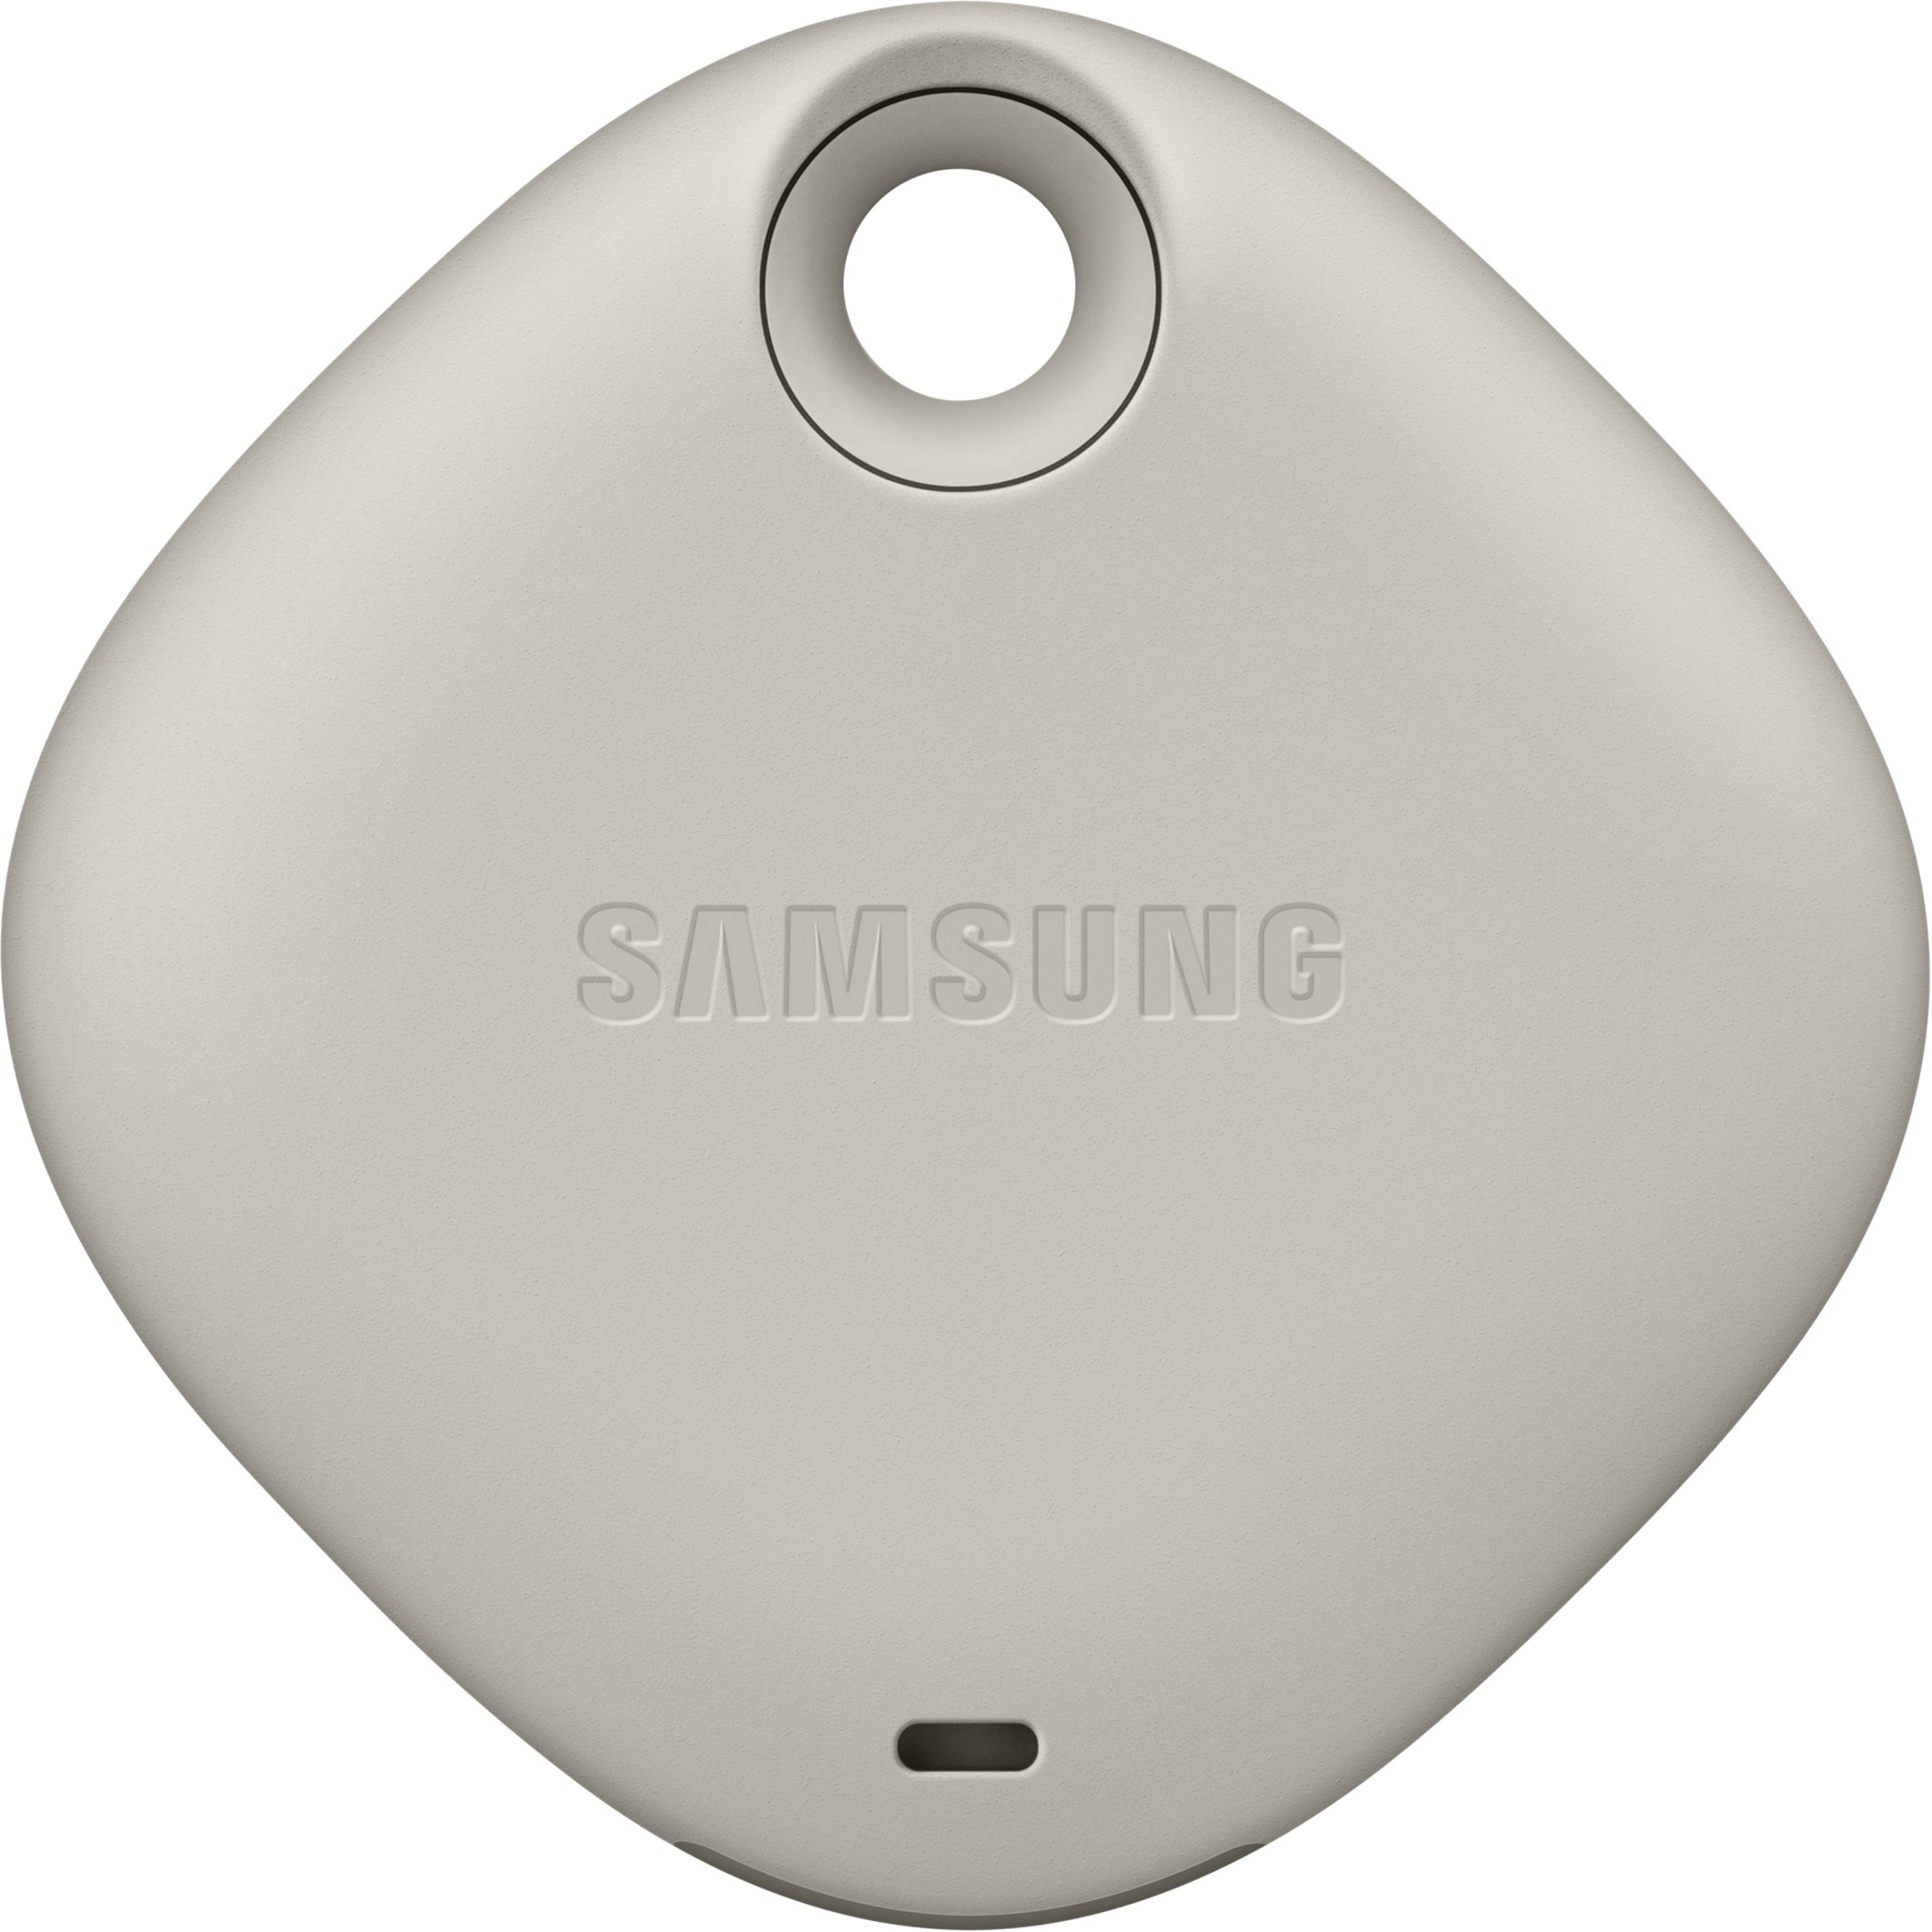 Samsung Galaxy SmartTag, 1-Pack, Oatmeal - image 4 of 8